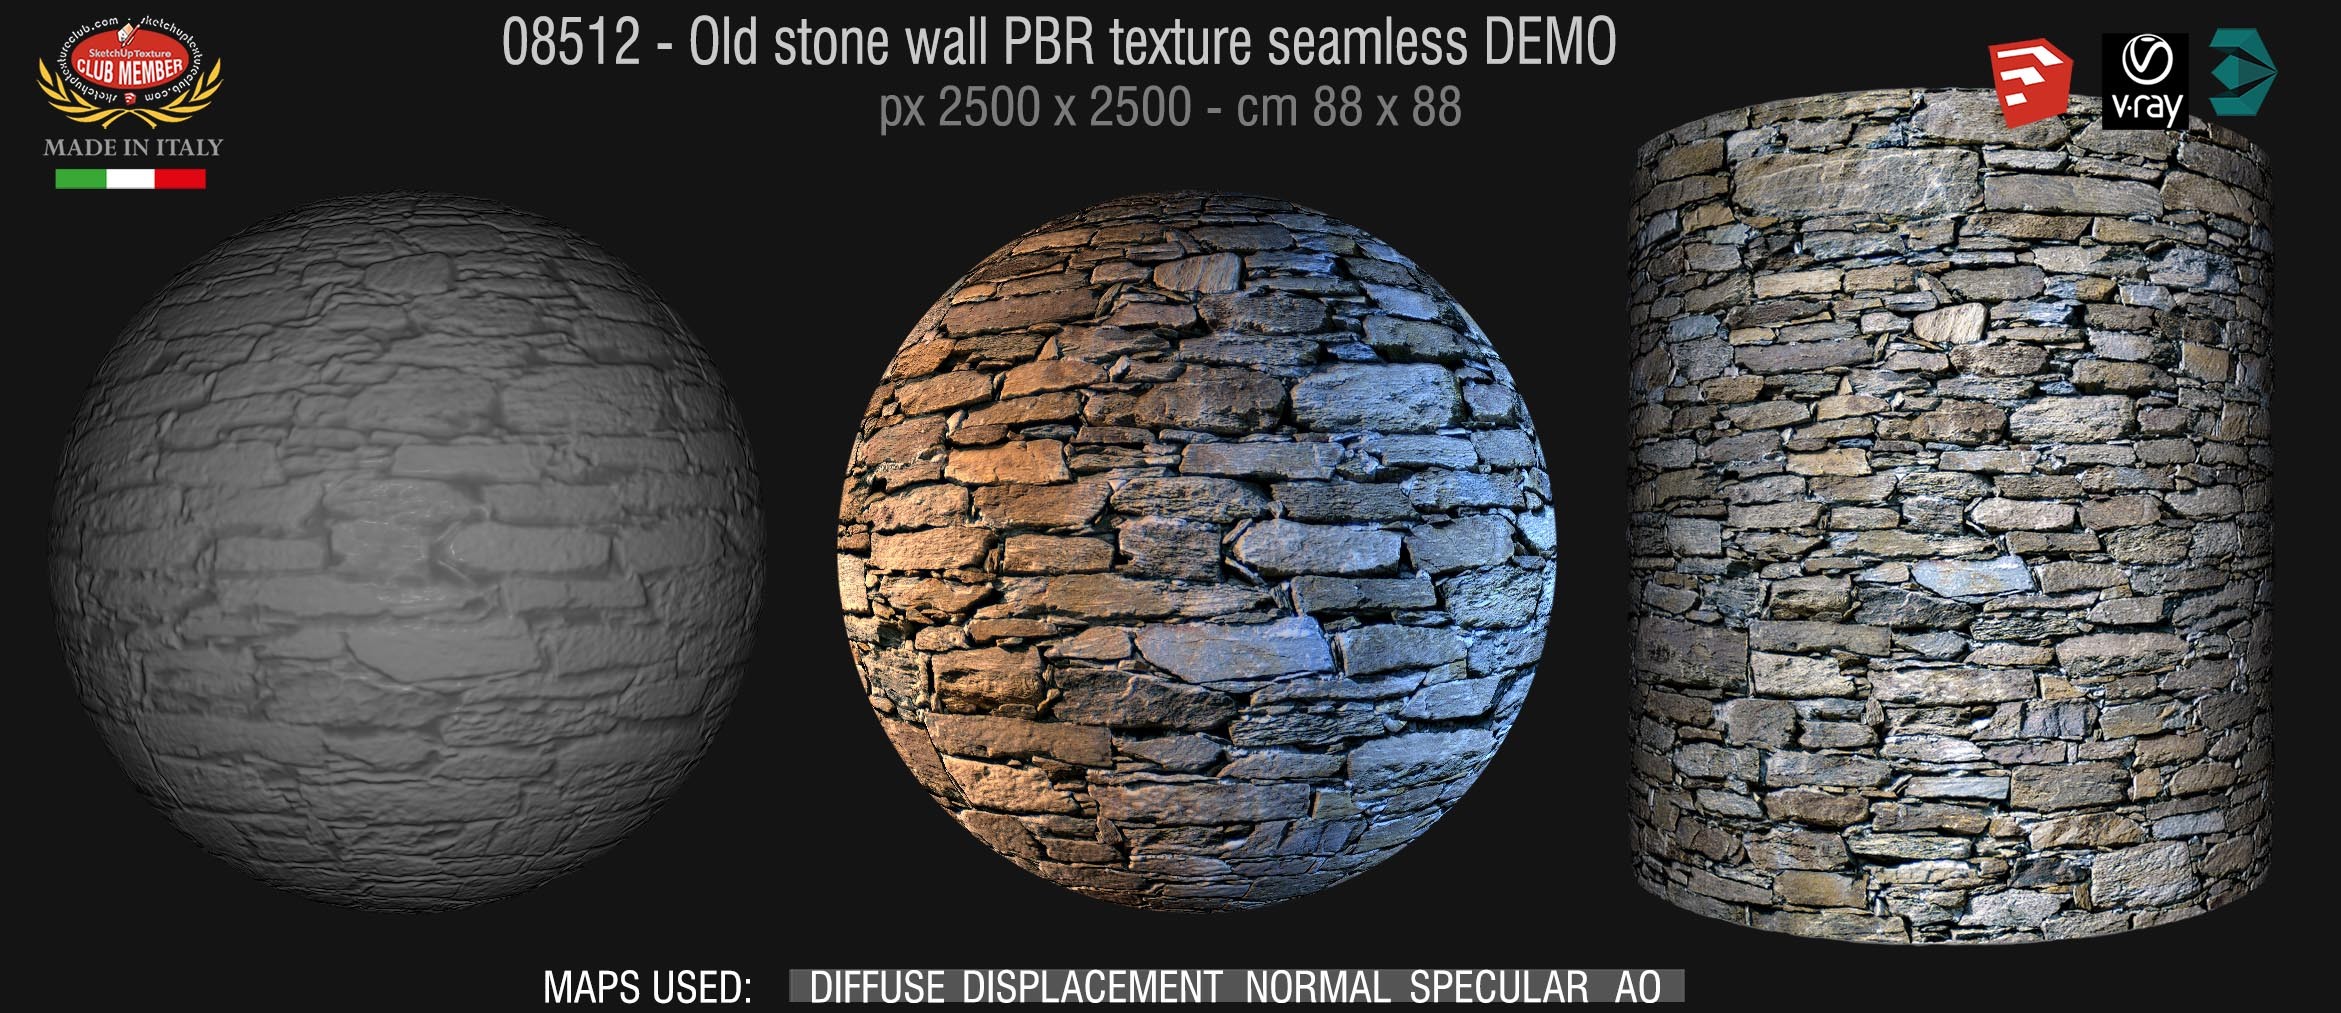 08512 Old stone wall PBR texture seamless DEMO